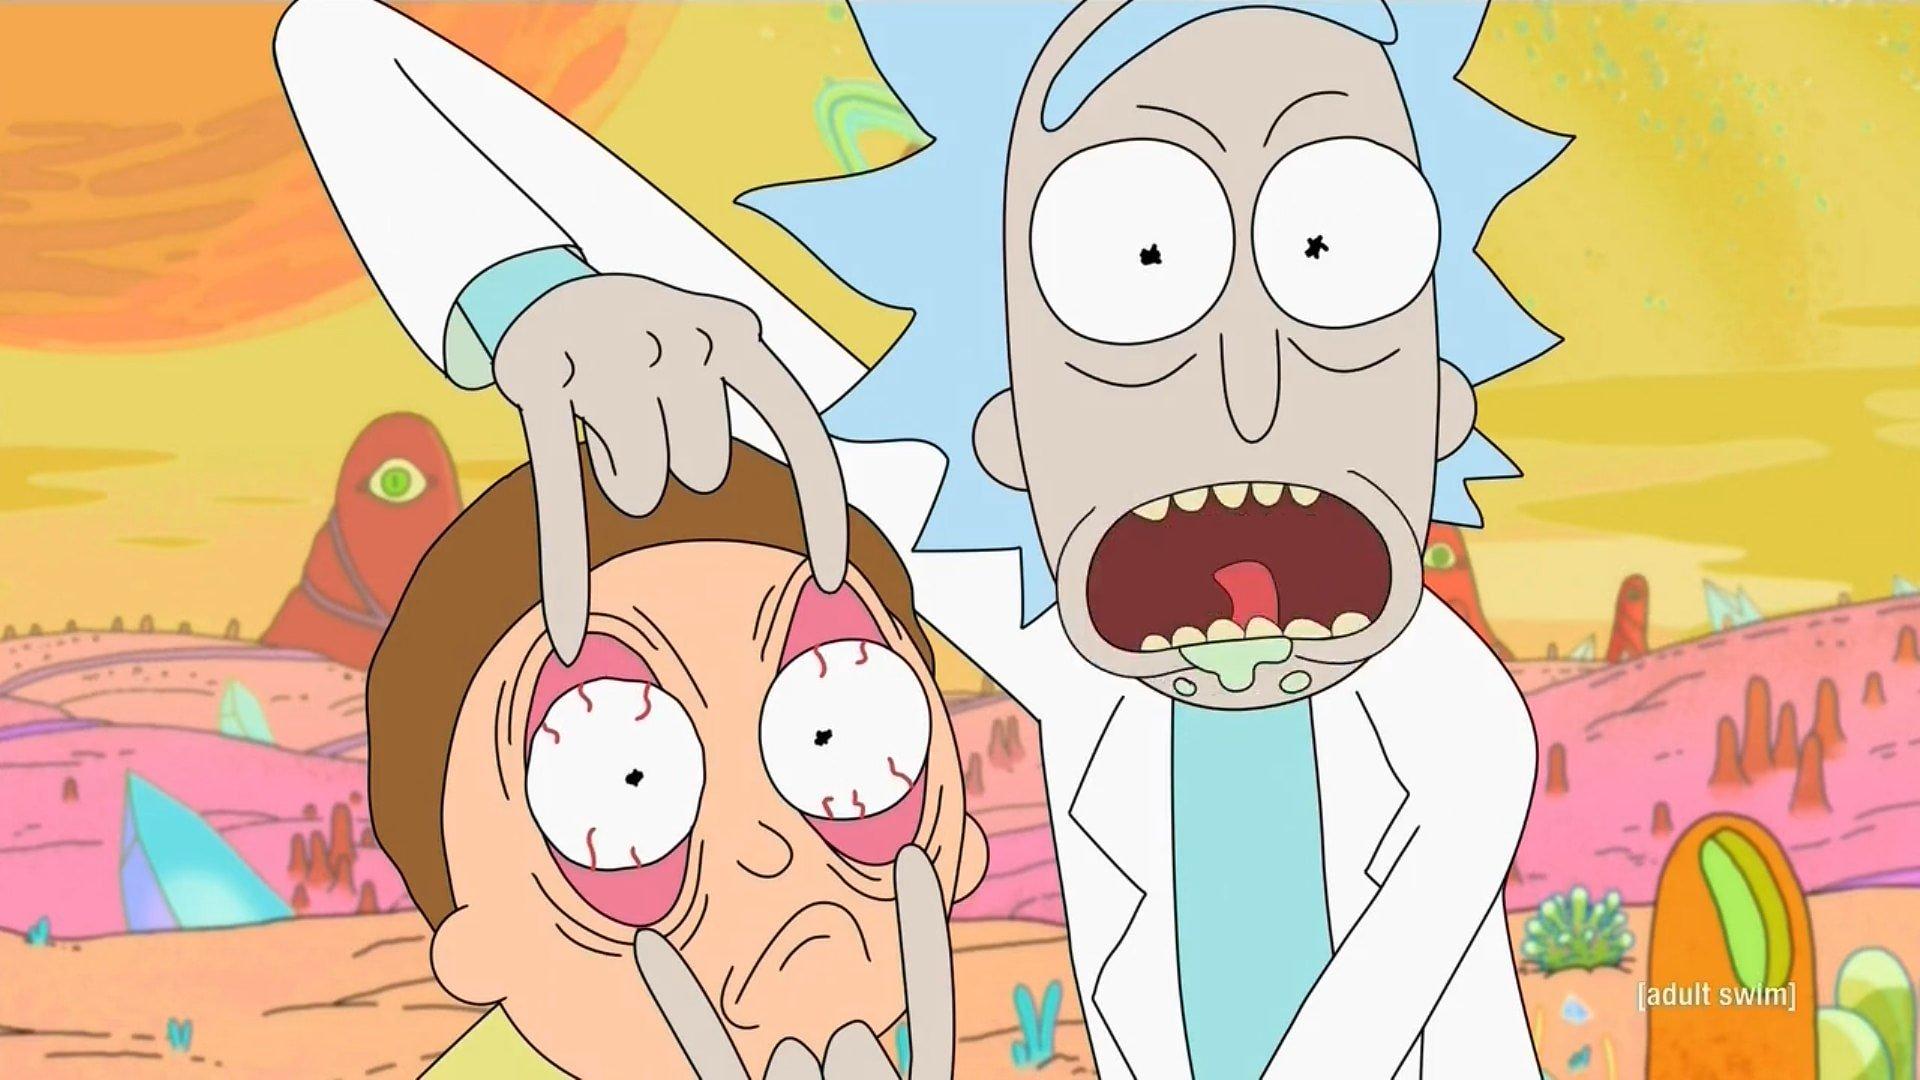 RICK AND MORTY SEASON 4 IS COMING THIS YEAR